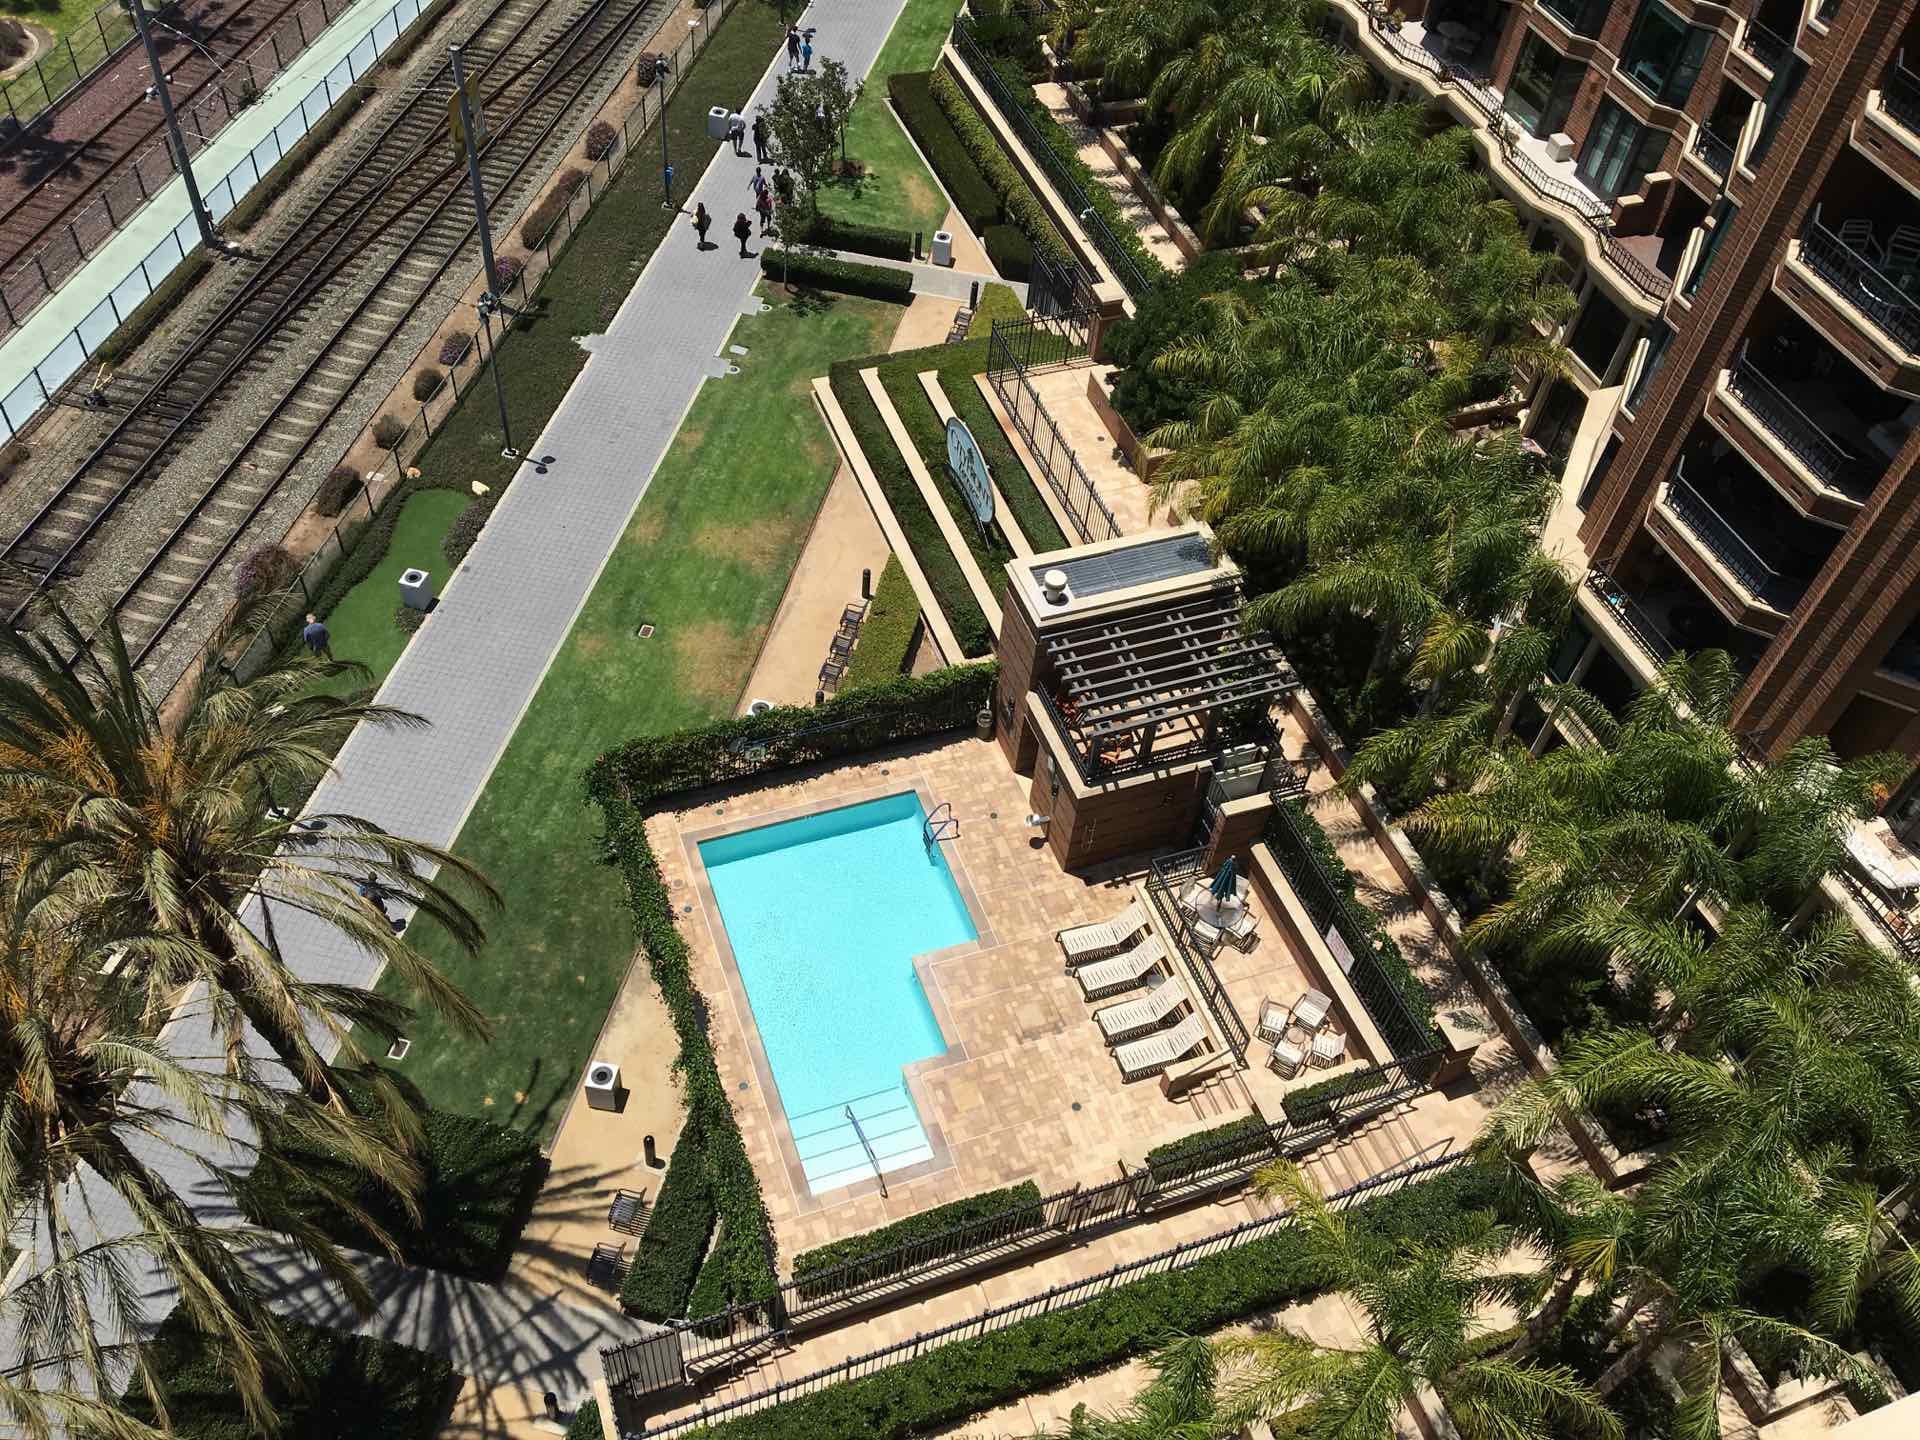 pool deck area seen from the air